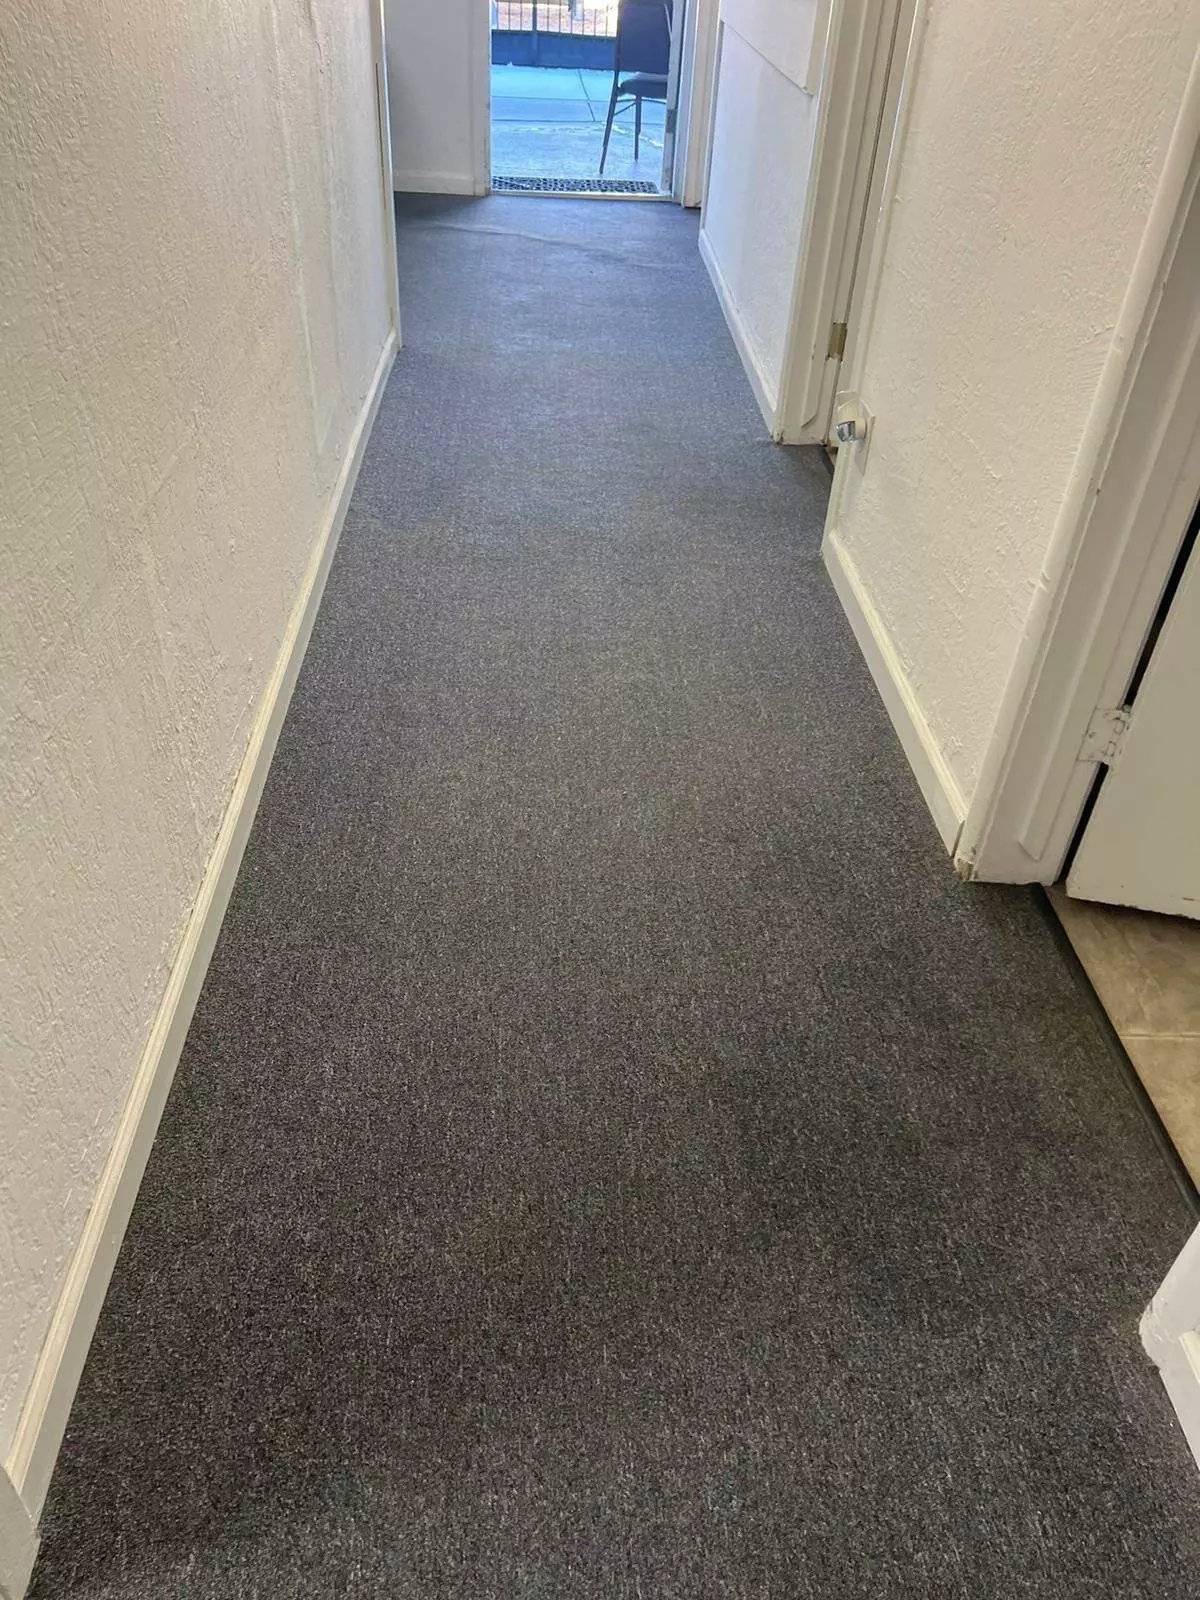 A carpeted hallway in need of professional cleaning.